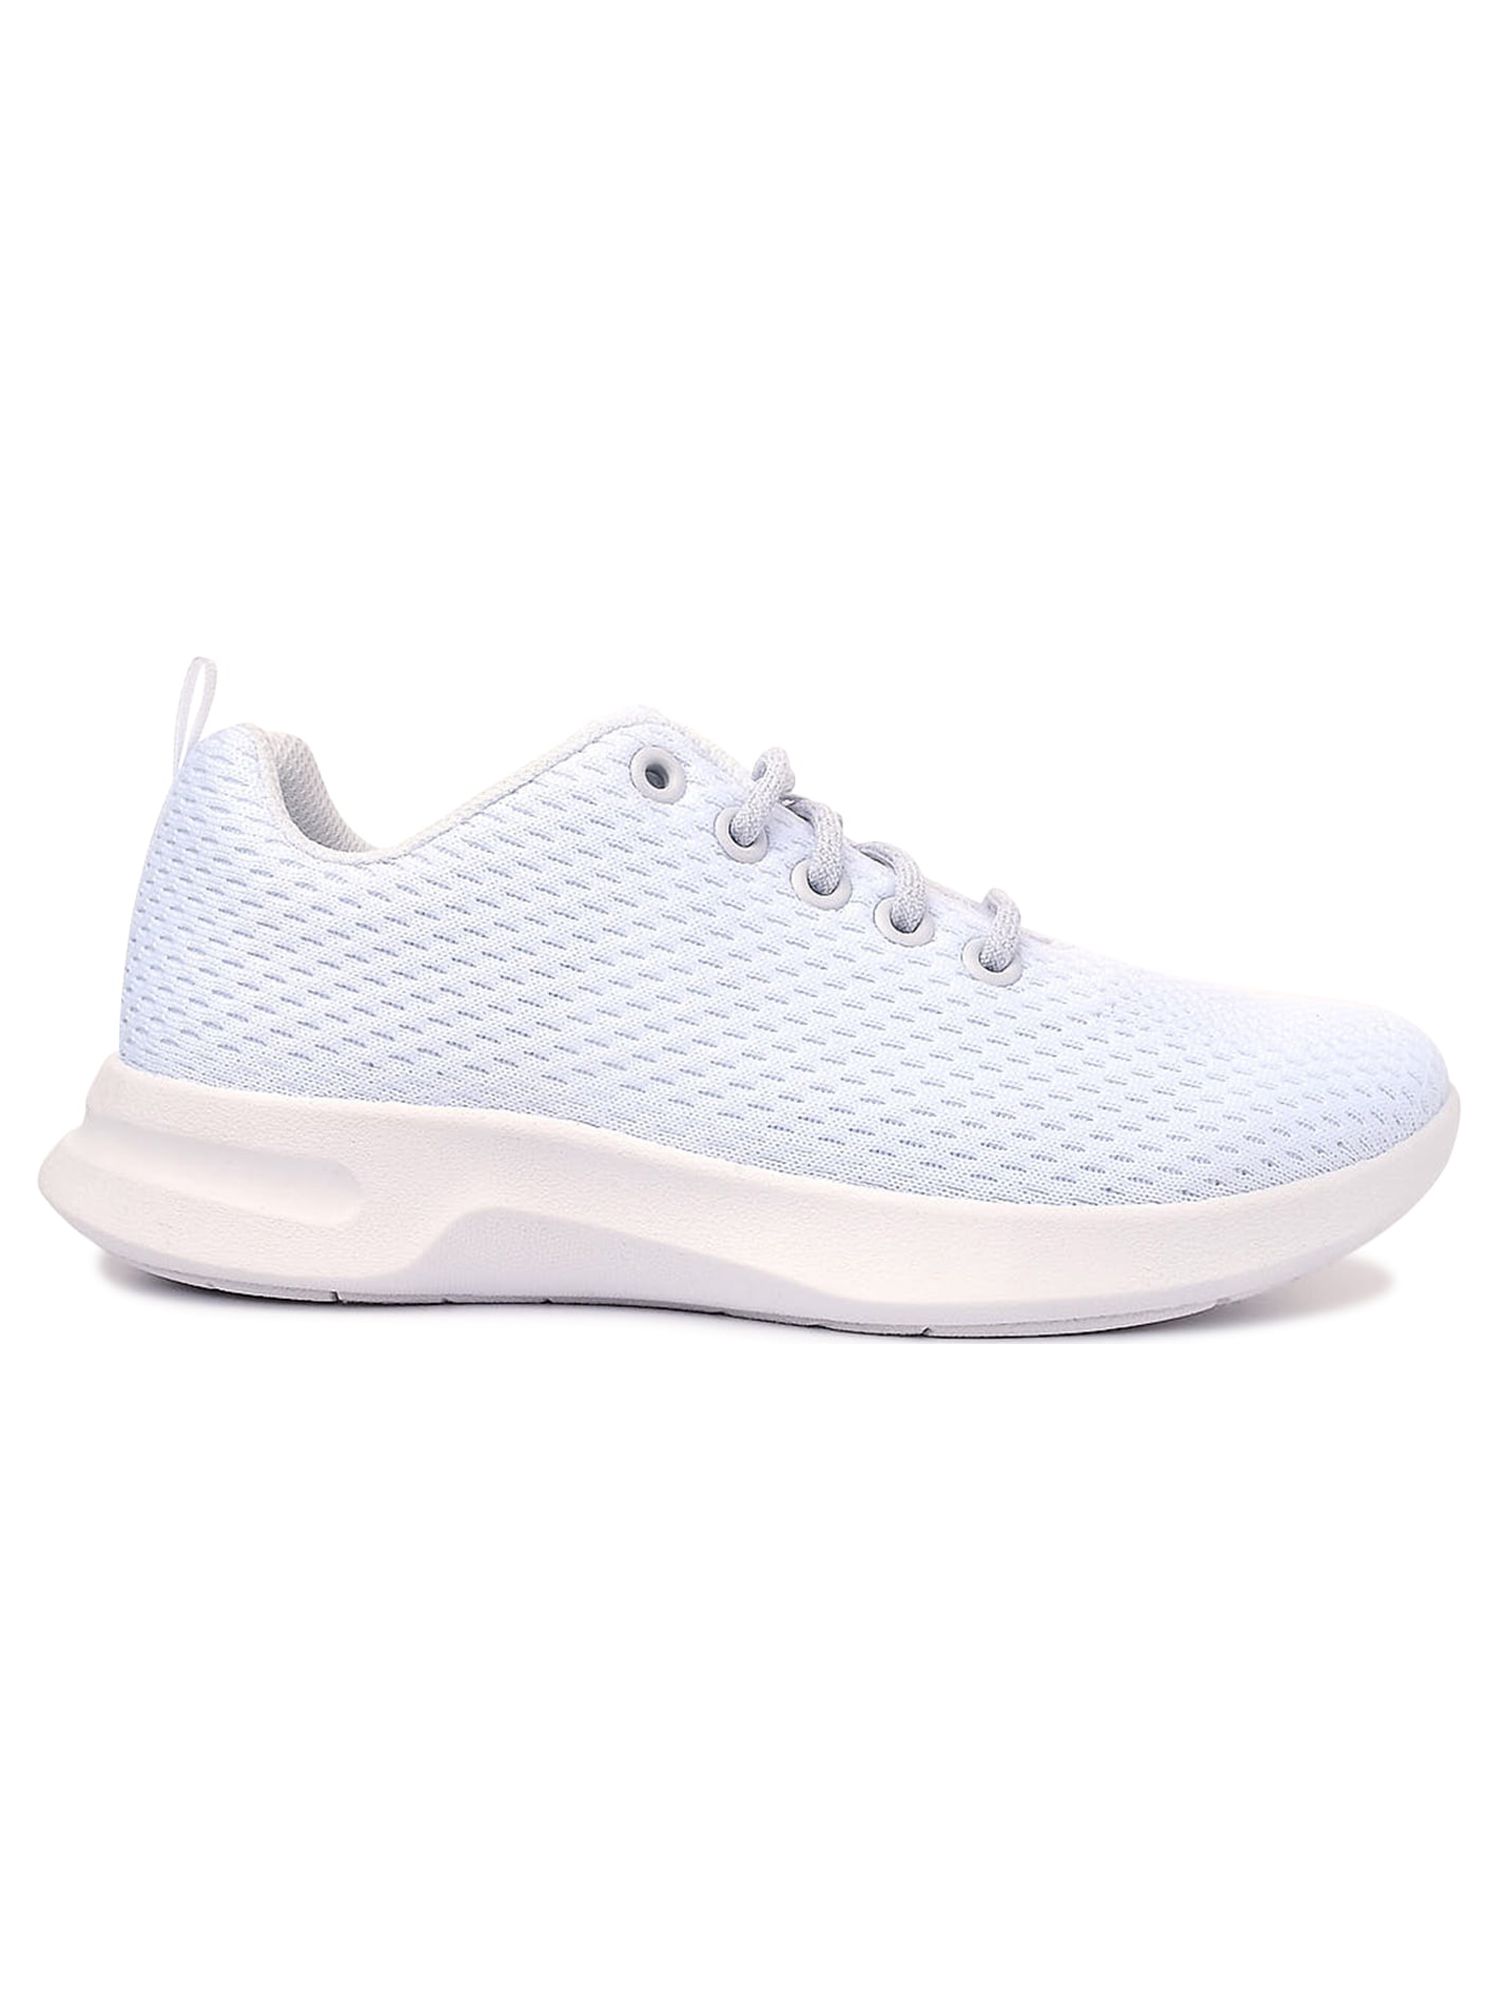 Athletic Works Women's Lifestyle Jogger Sneakers, Wide Width Available - image 3 of 5